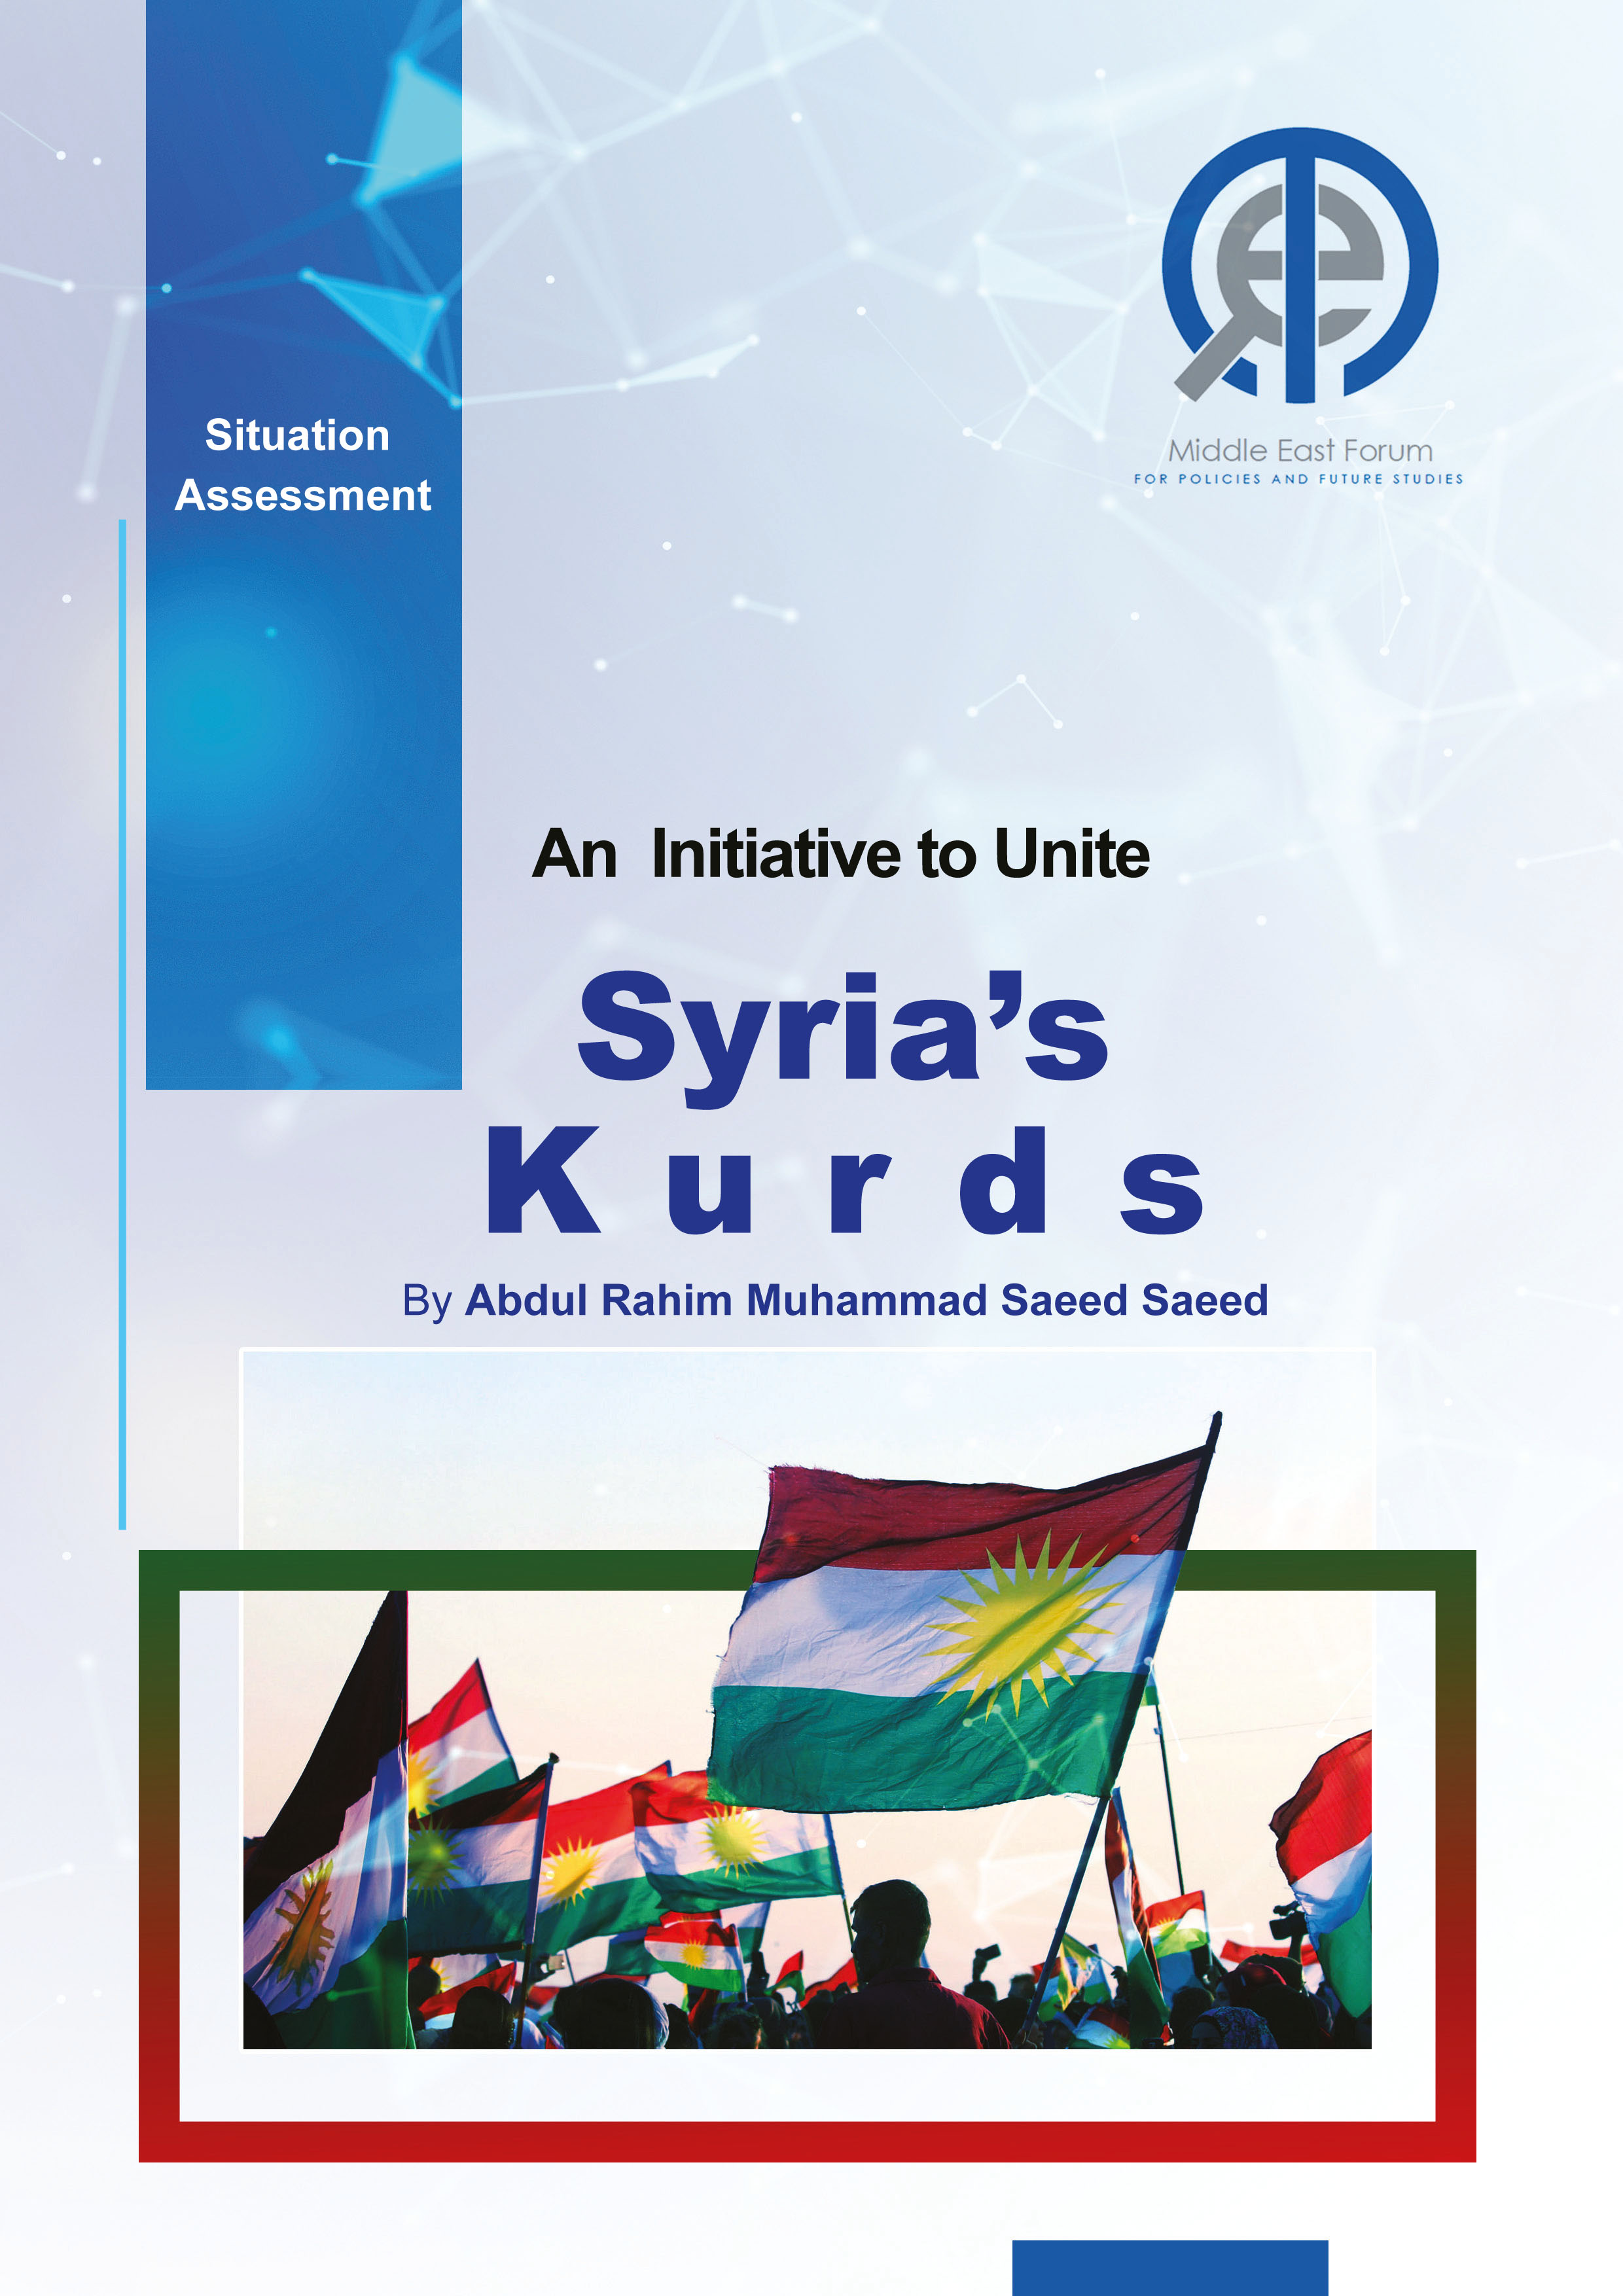 Situation Assessment: An Initiative to Unite Syria’s Kurds